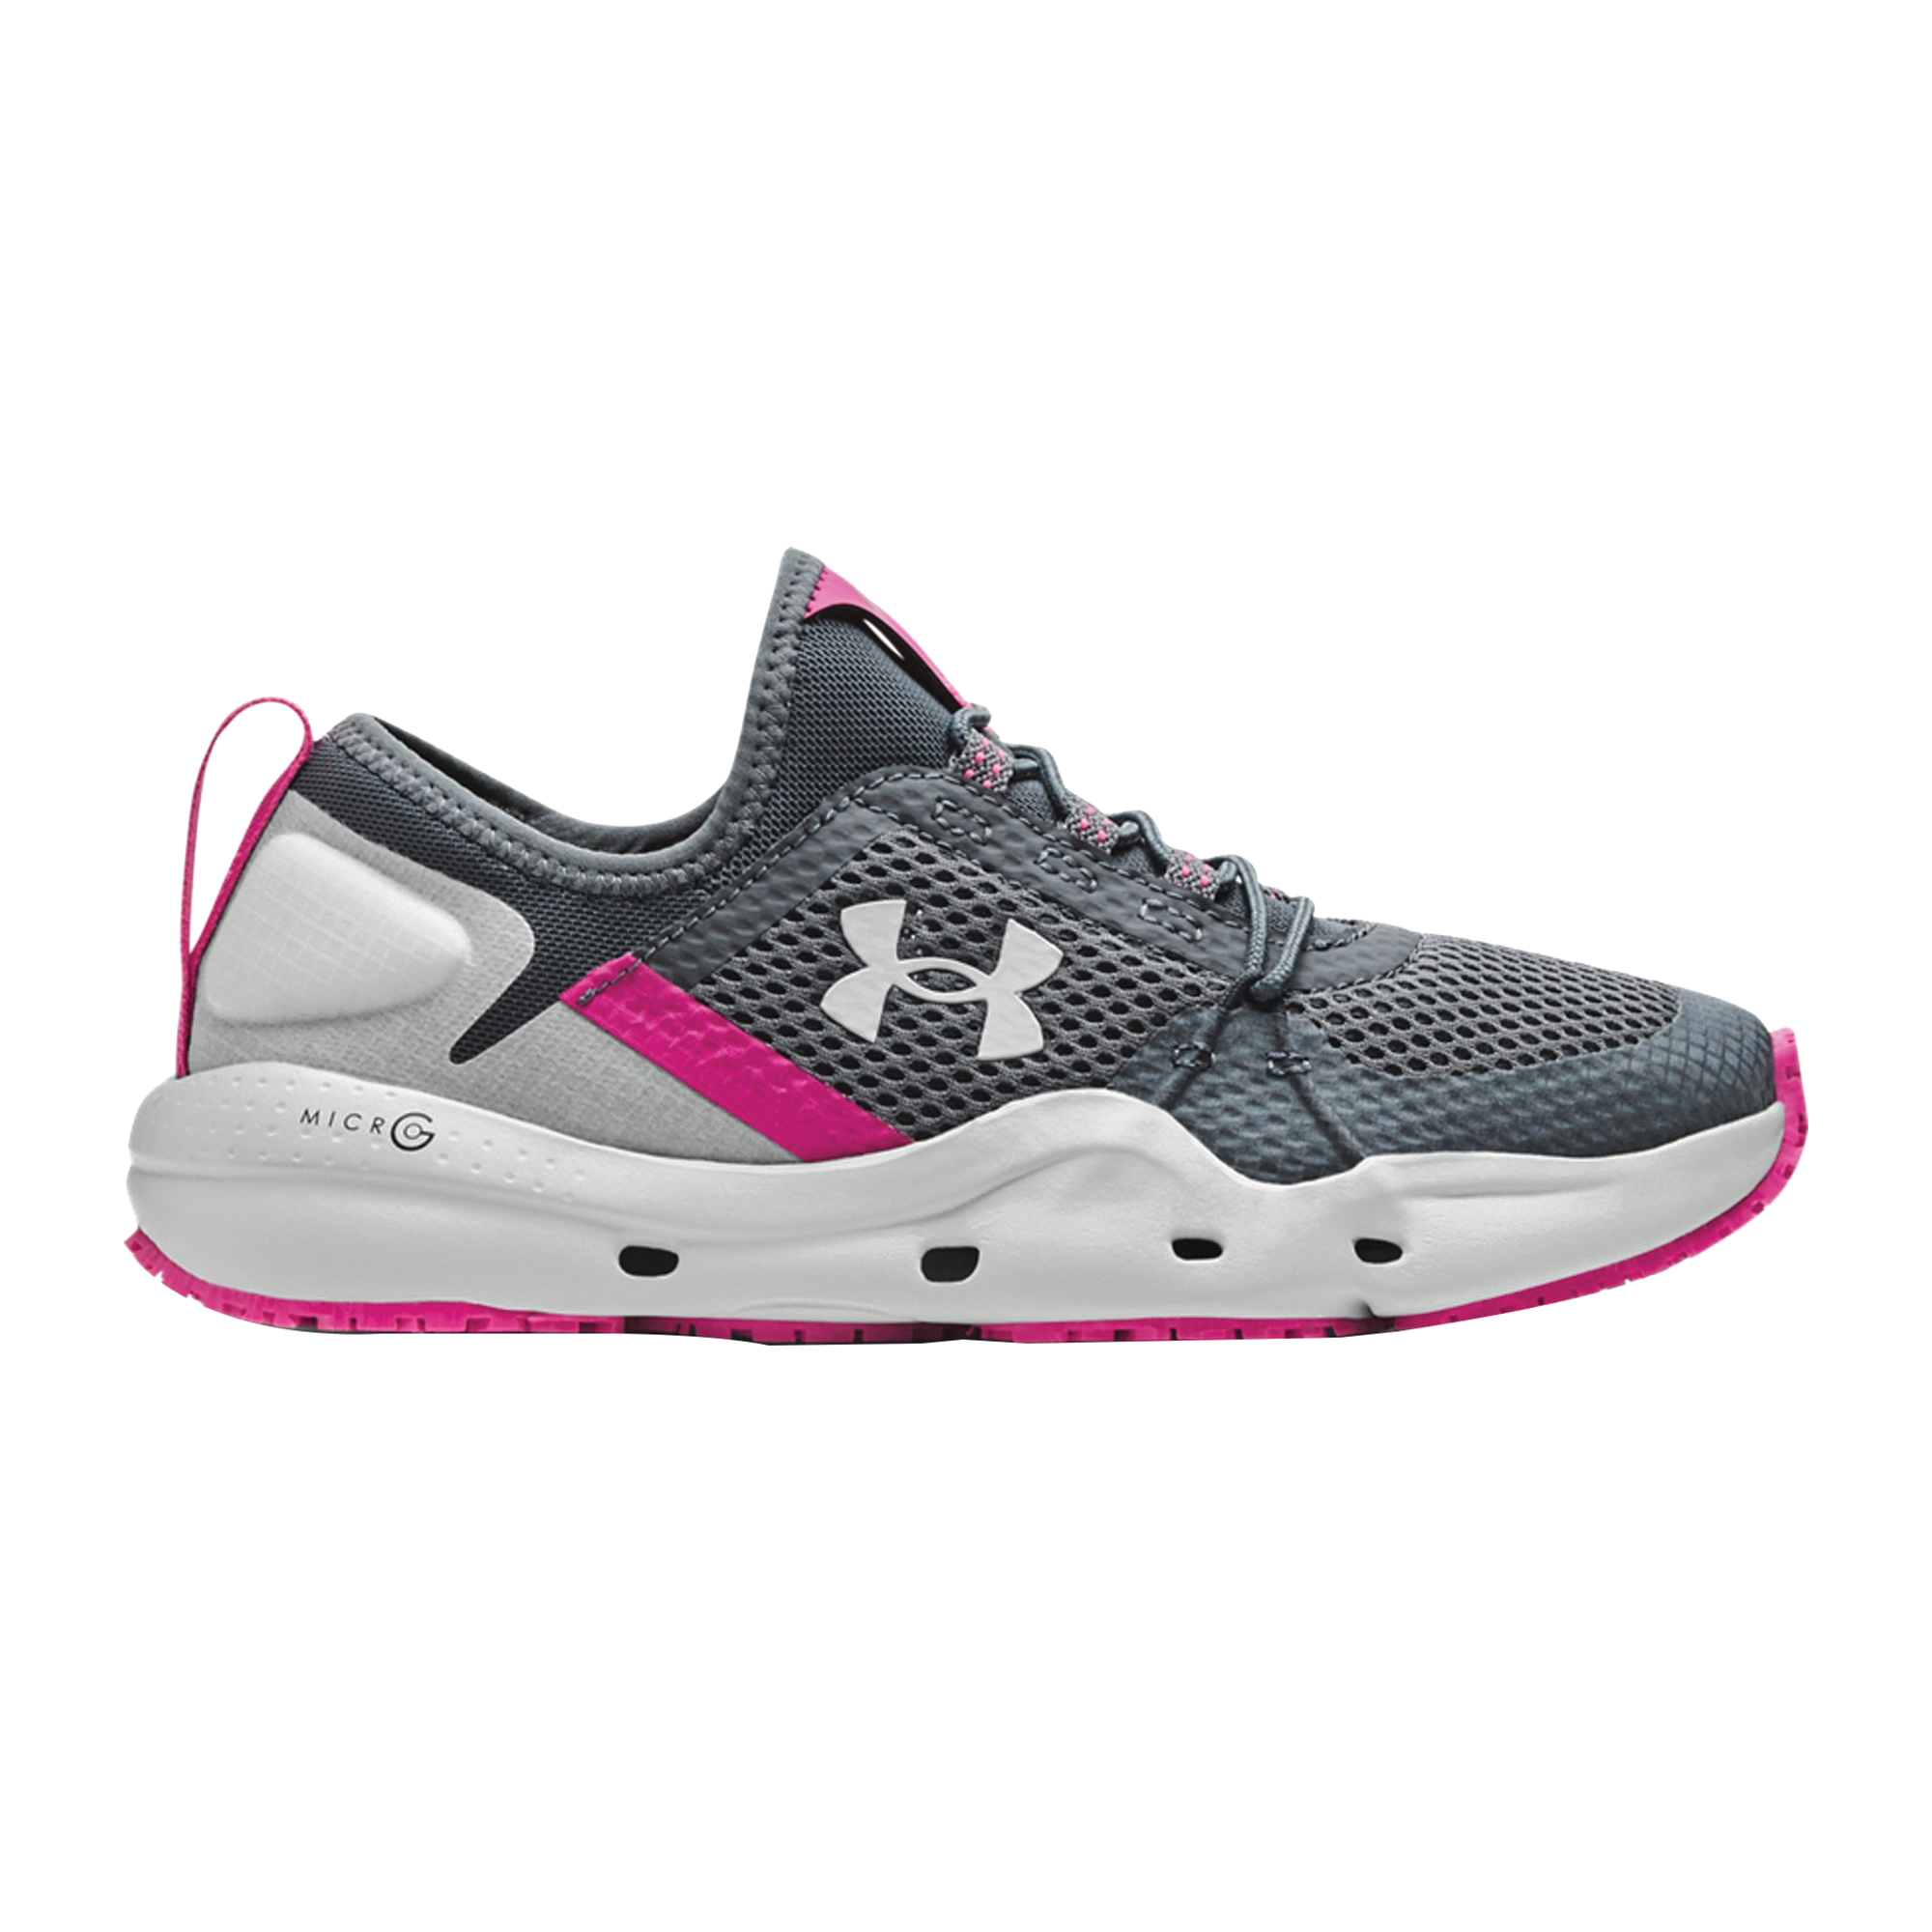 Under Armour Kilchis Series 3023740-103-8 Fishing Shoes, 8, Gravel/Gray Mist, Synthetic Leather, Lace-Up - 1